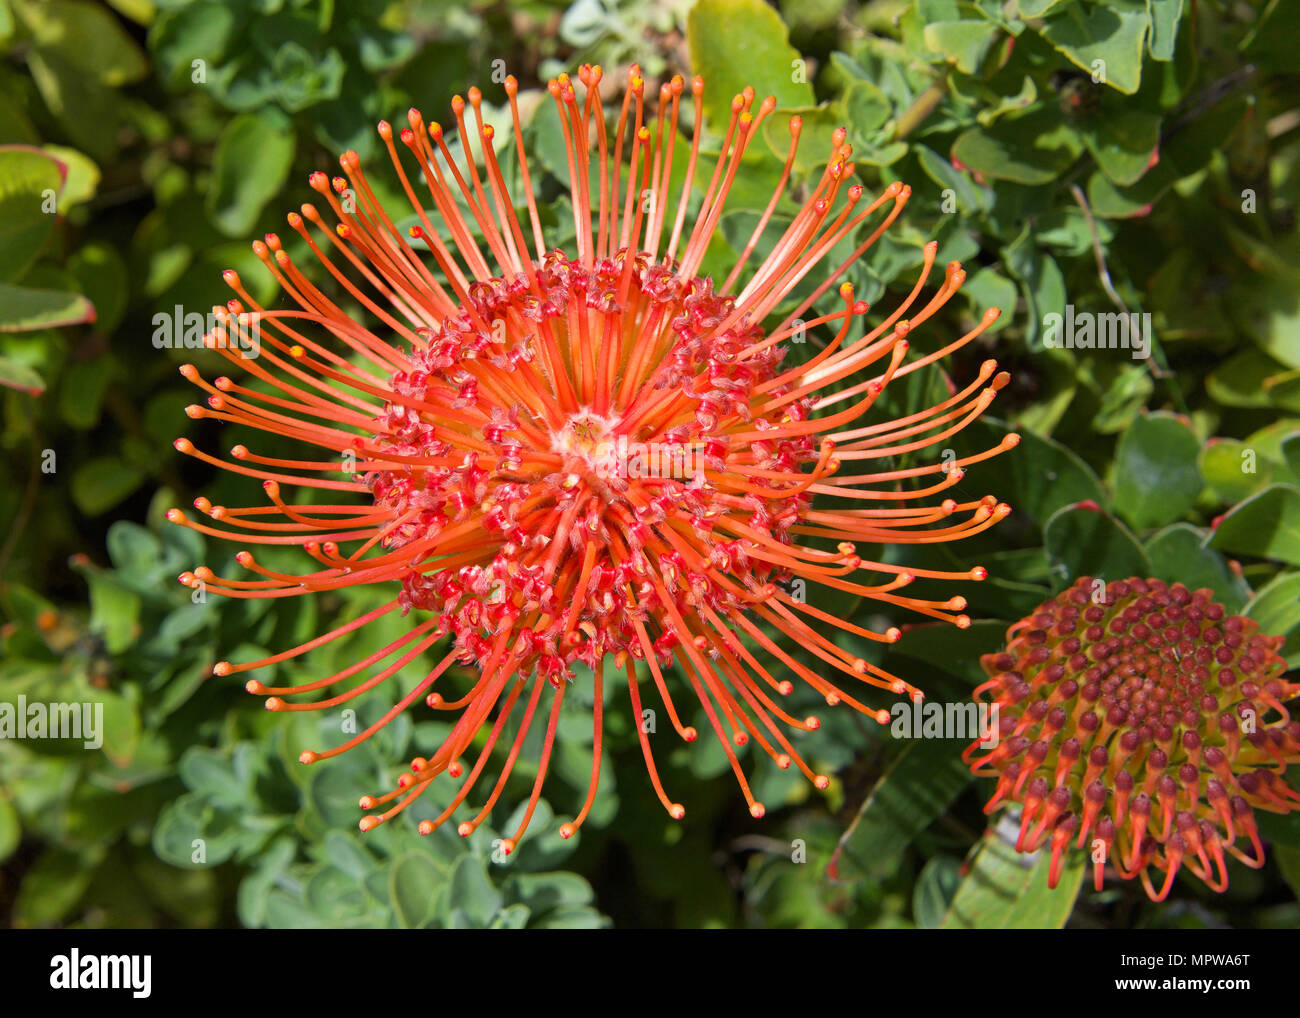 Red orange pin cushion protea flower, close up with leaves and other flowers in background. Proteas are currently cultivated in over 20 countries. Stock Photo